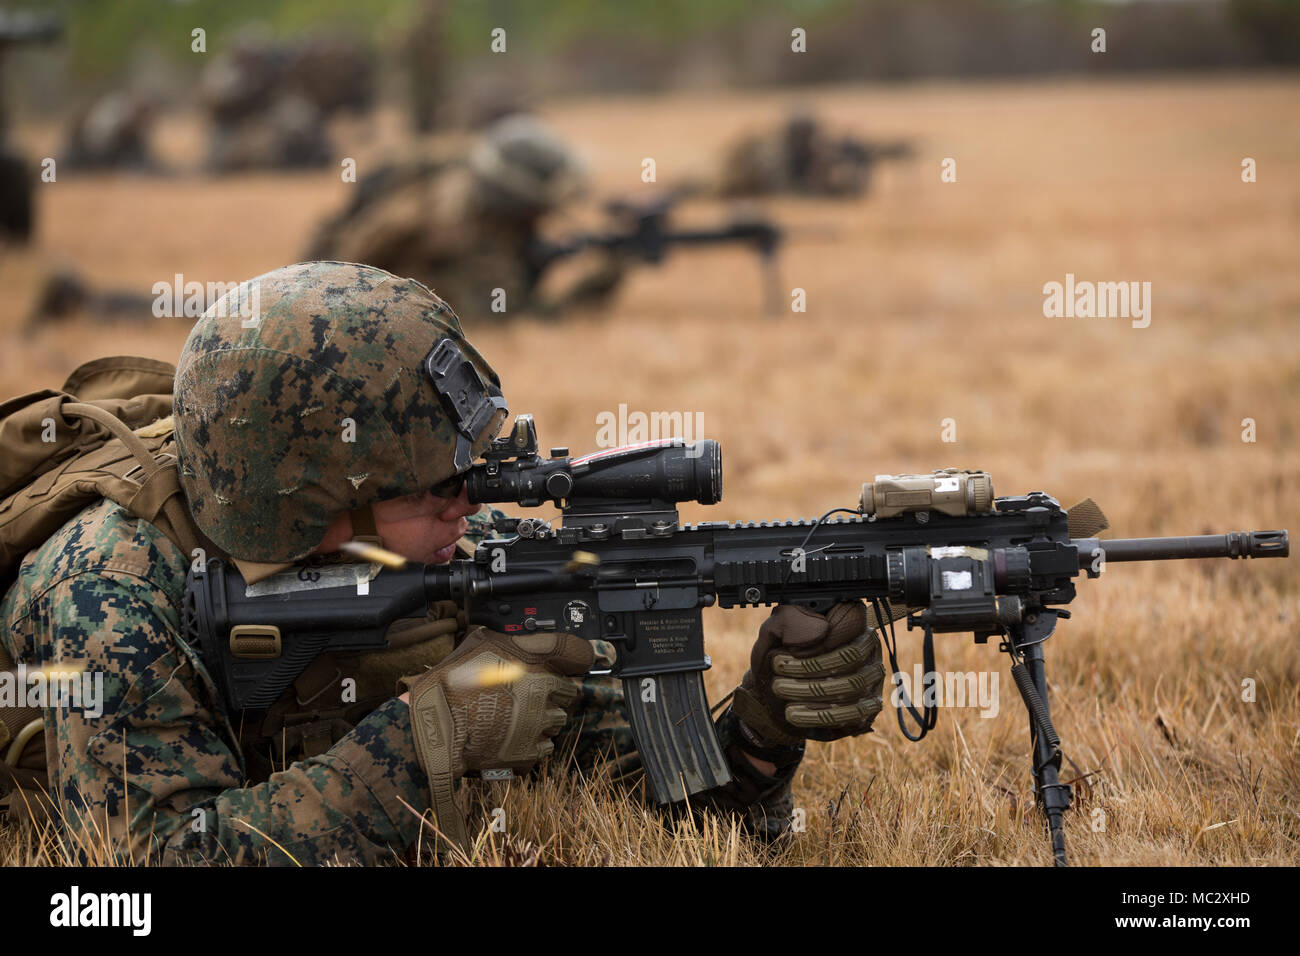 Marines with 1st Battalion, 2nd Marine Regiment, 2nd Marine Division, provide suppressive fire at a platoon live-fire range during a training exercise at Camp Lejeune, N.C., Jan. 23, 2018. The training is meant to maintain proficiency at the squad and platoon-level of warfighting by patrolling, breaching obstacles, and conducting live-fire movements to take an objective. (U.S. Marine Corps photo by Lance Cpl. Ashley McLaughlin) Stock Photo